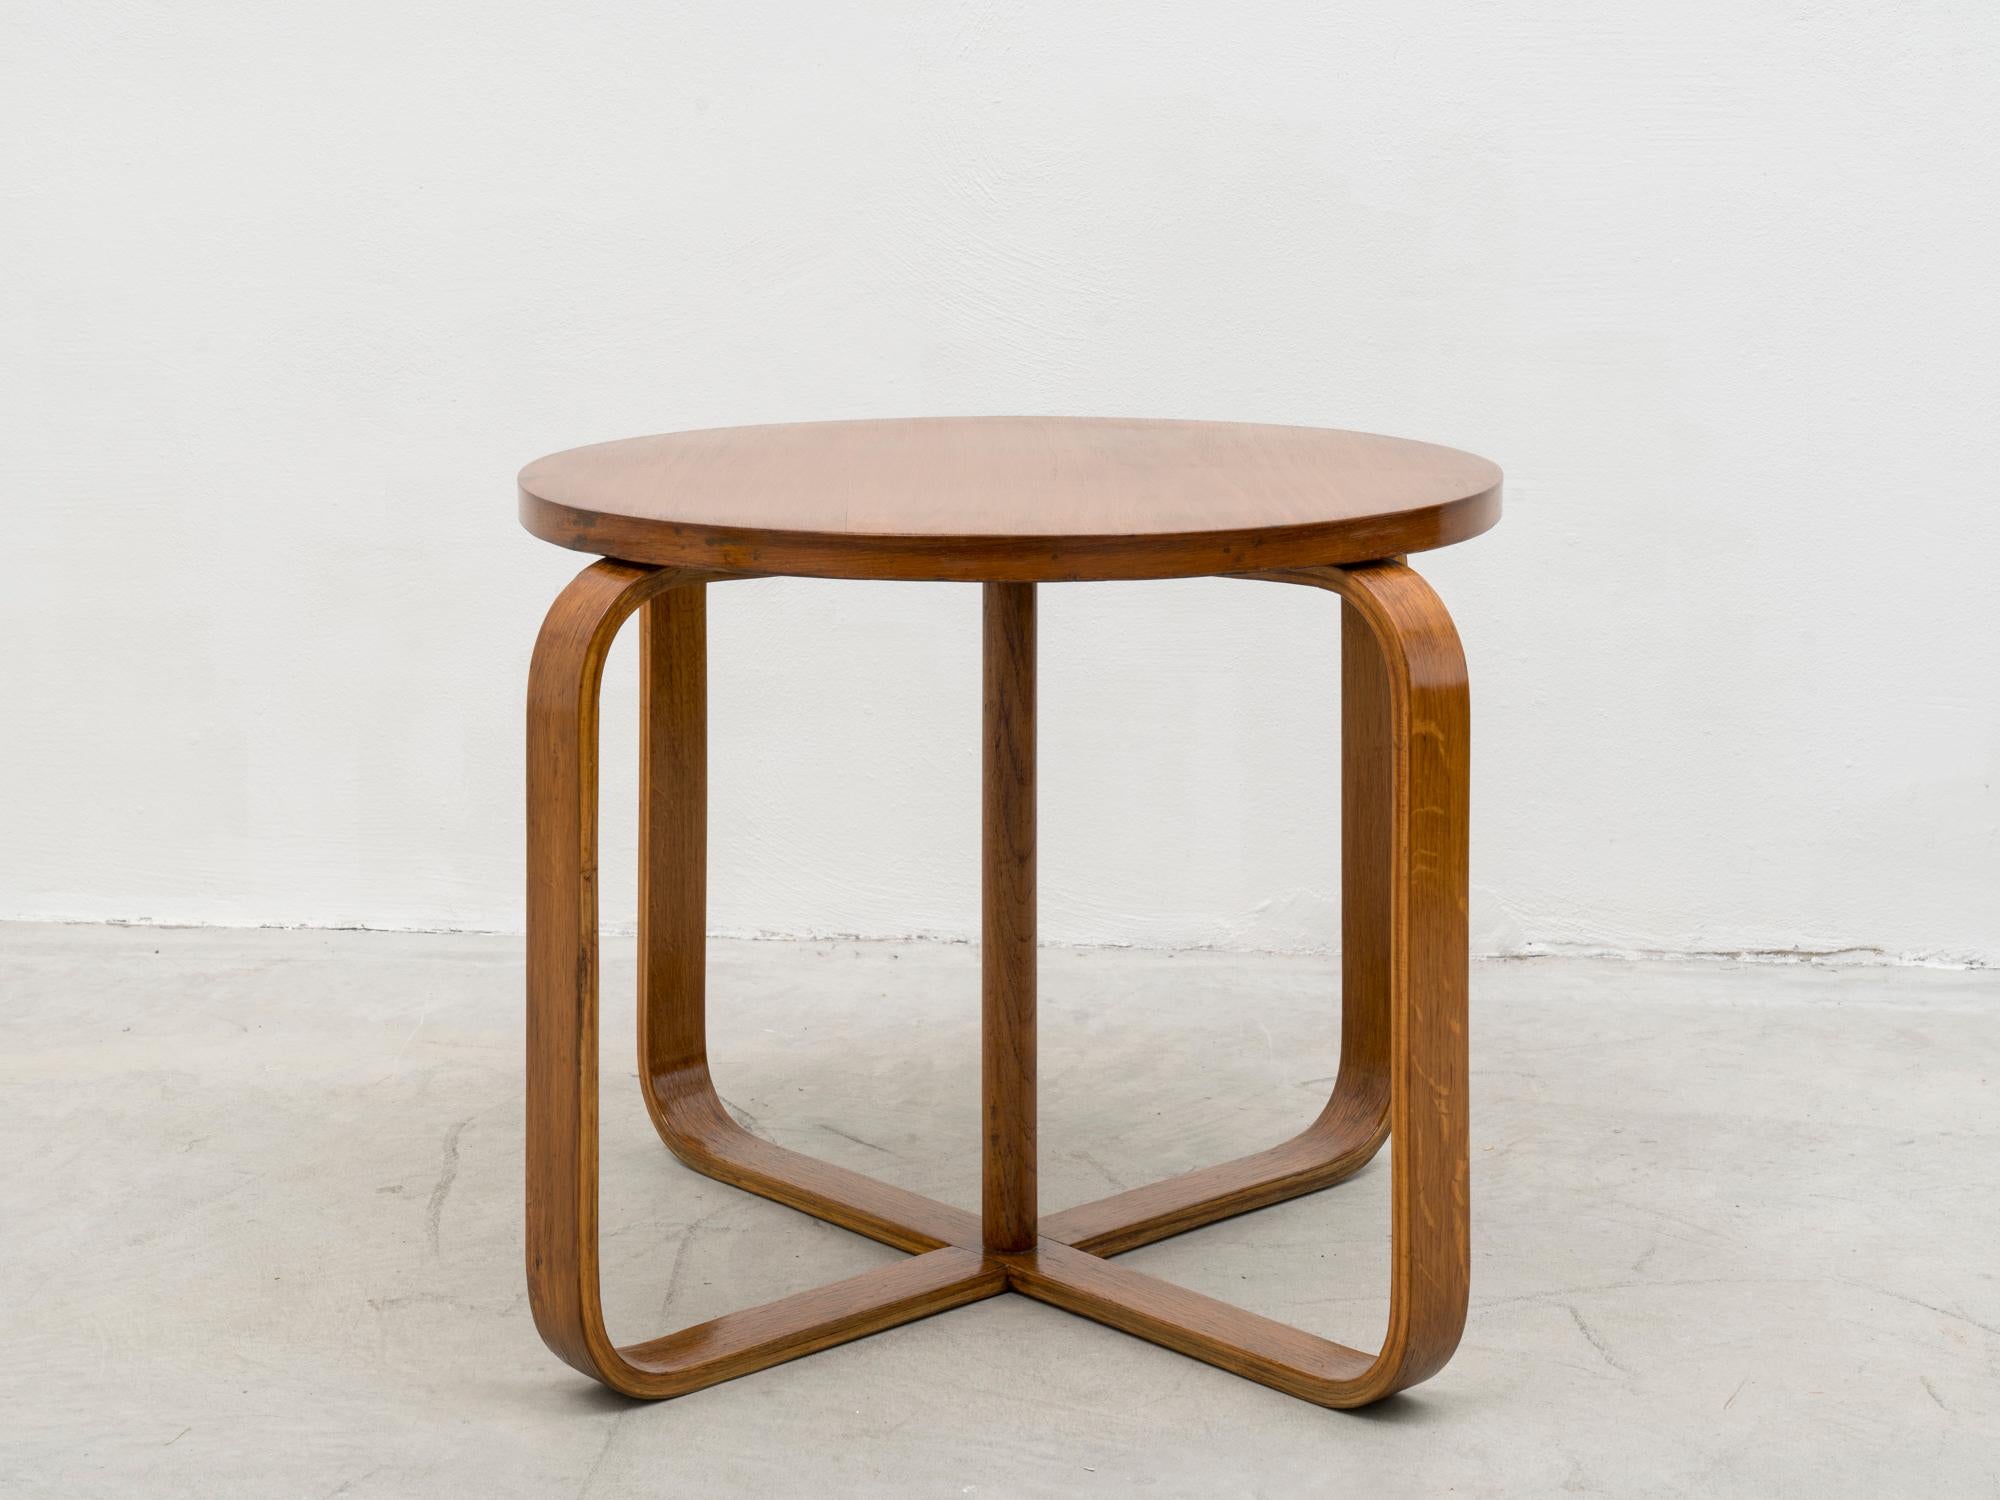 Rationalist coffee table by the Istrian architect Giuseppe Pagano, born Pogatschnig. This piece, made of veneered bent plywood, was designed in 1935 and part of the furnishing of the Bocconi University, in Milan, in 1941, when it was produced by